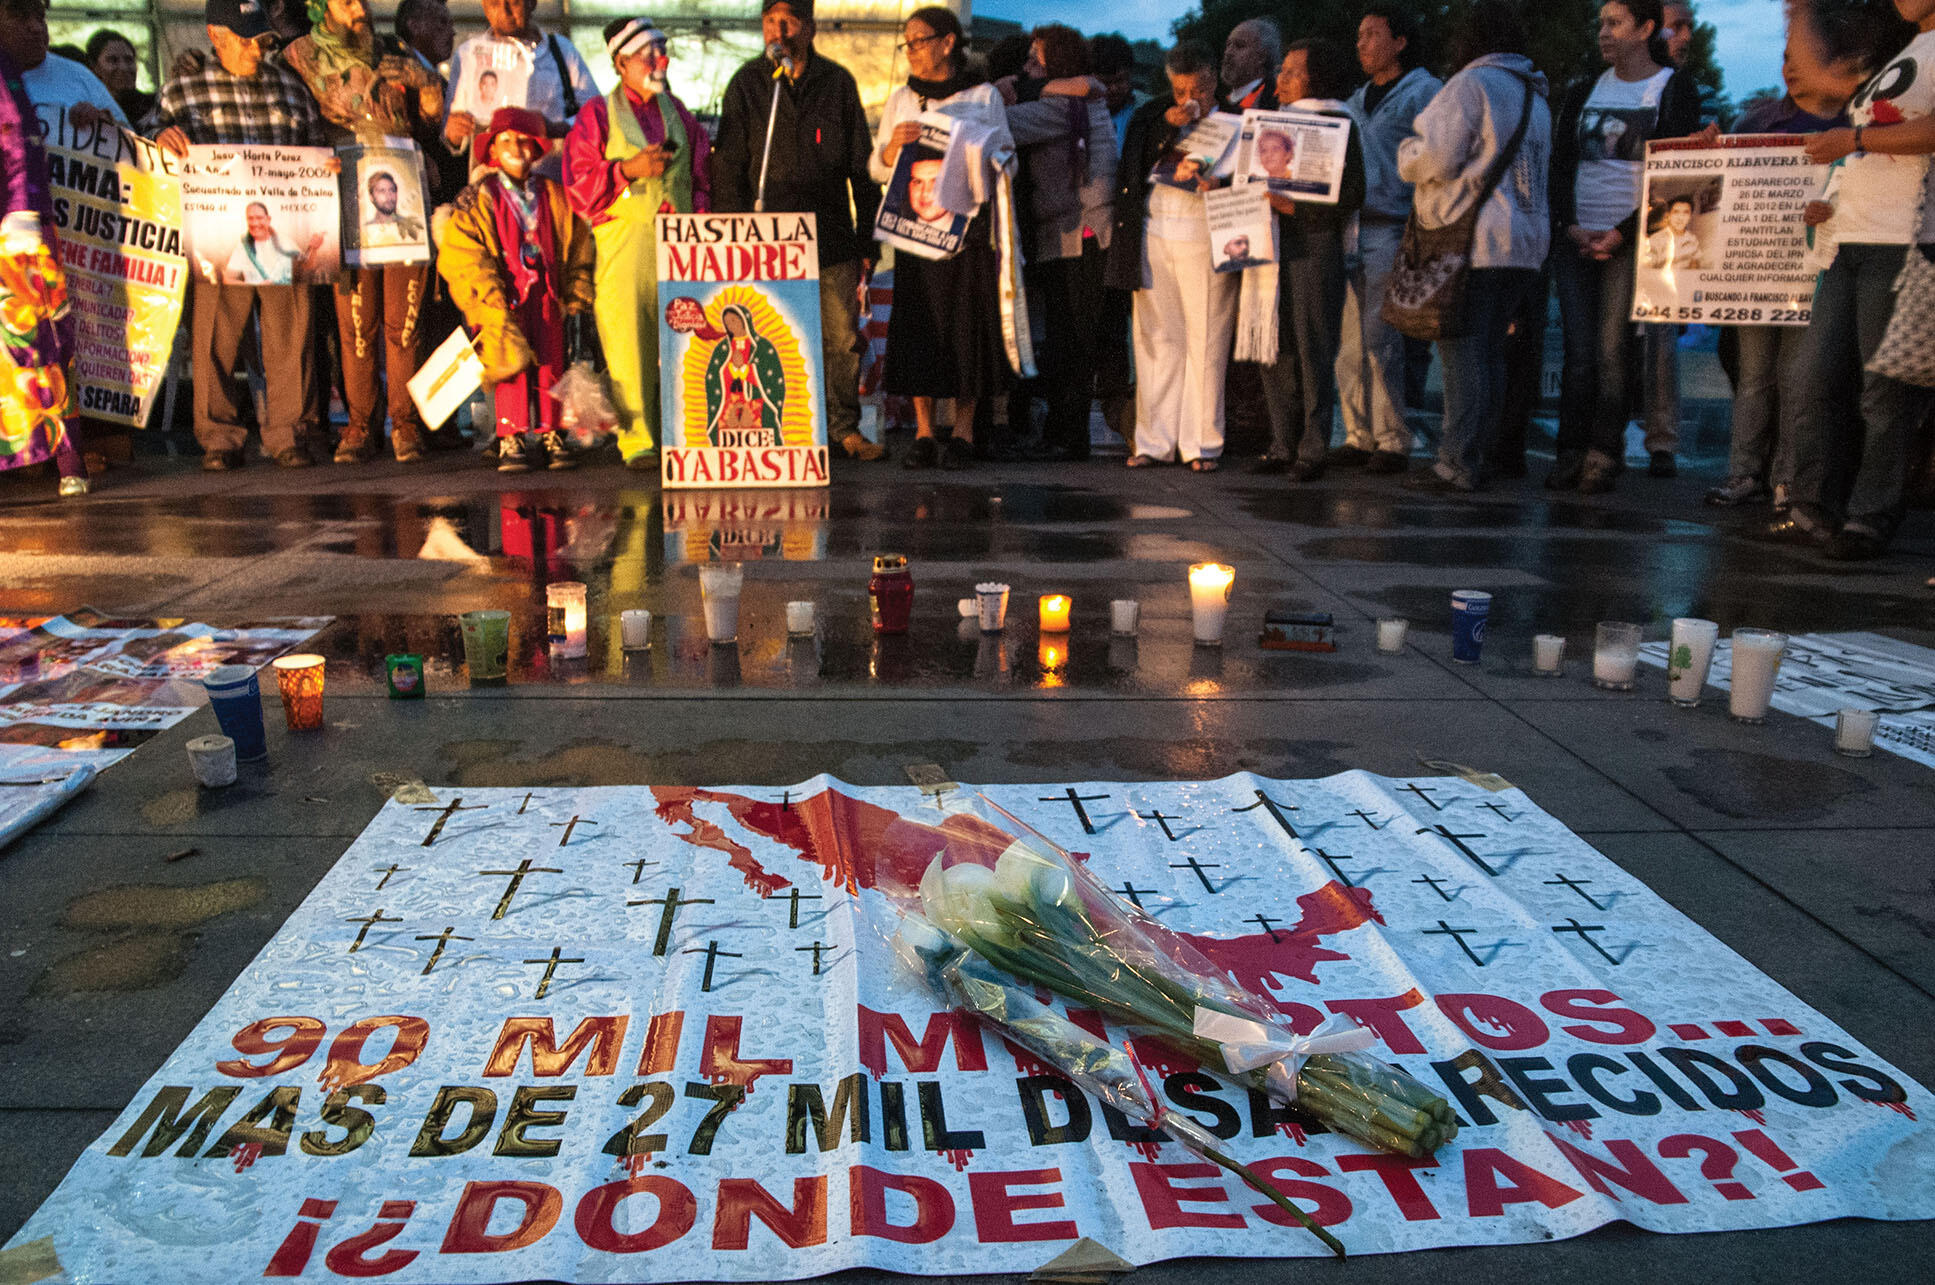 Candles and flowers mark a 2013 commemoration of those killed in Mexico’s ongoing violence. (Photo by Eneas de Troya.)